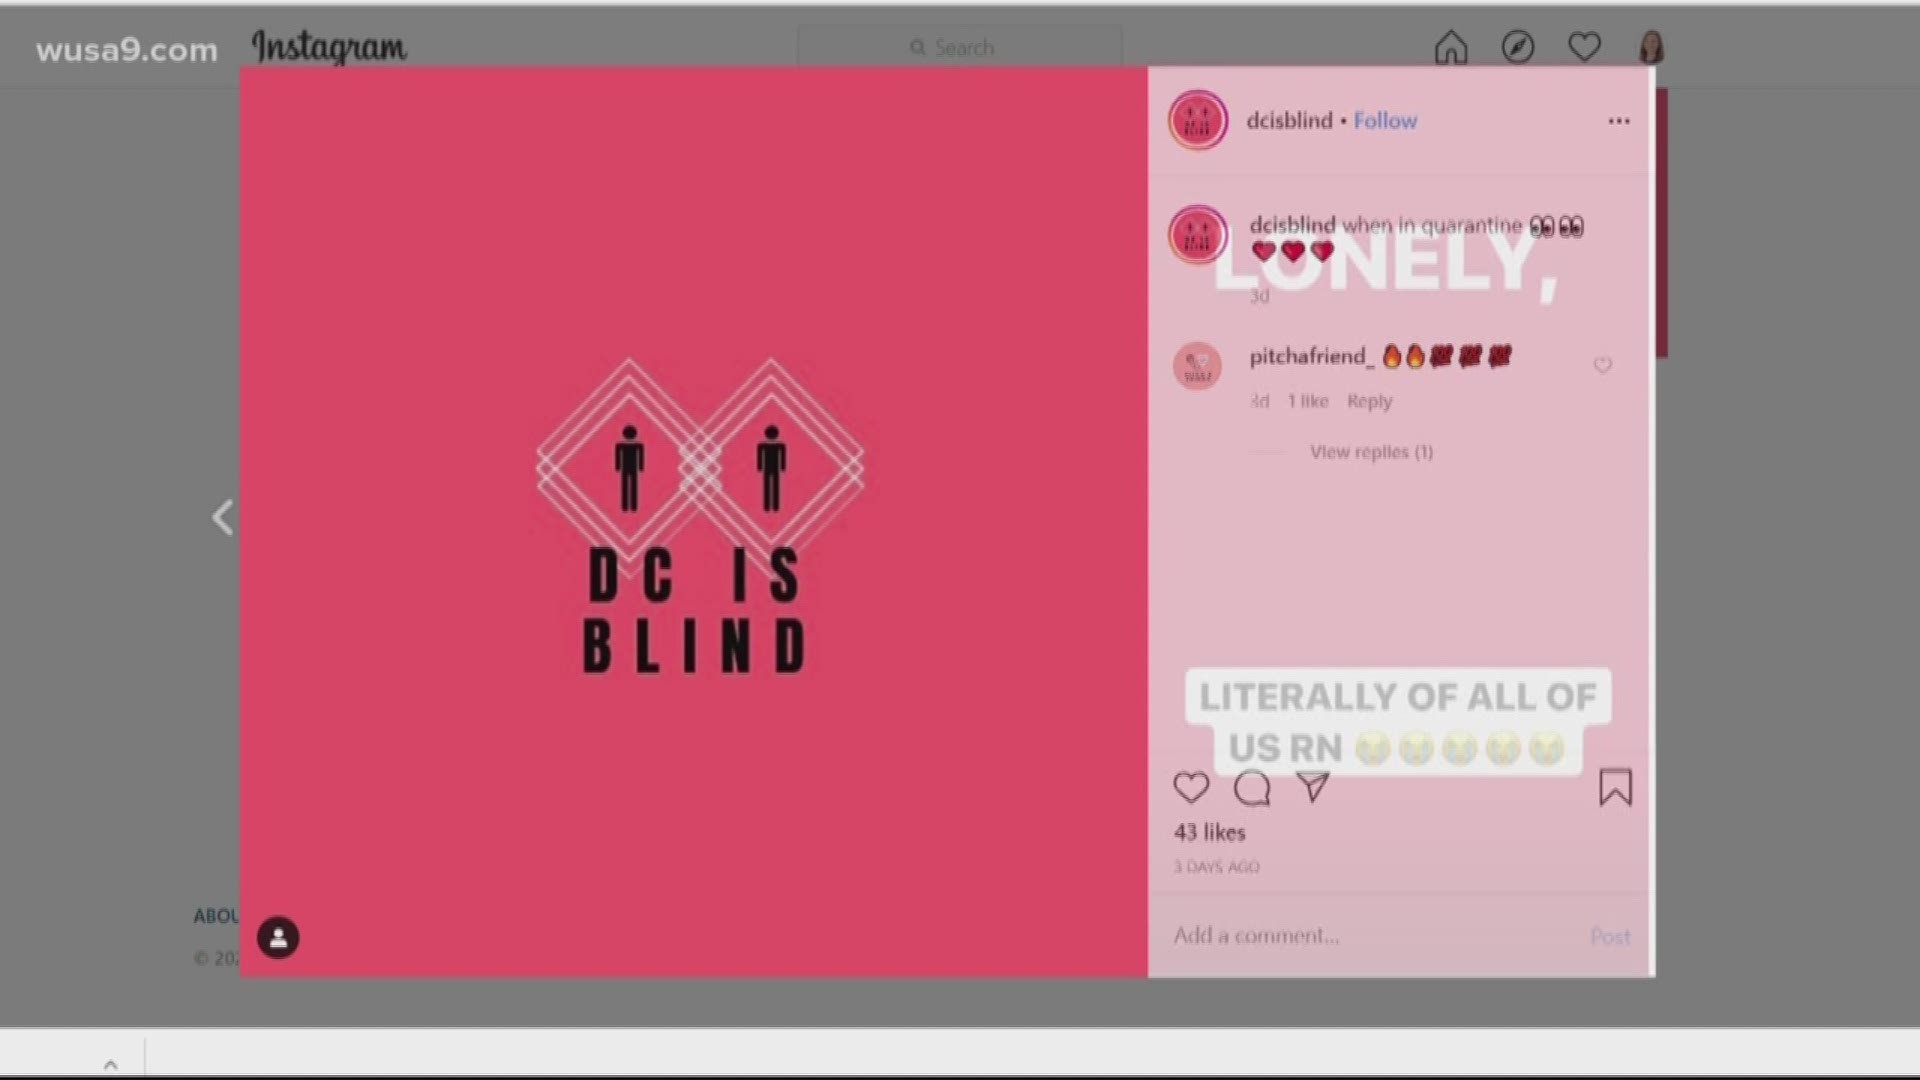 When the owner of a small marketing agency lost clients because of the coronavirus pandemic, she decided to create 'DC is Blind' to connect people in isolation.